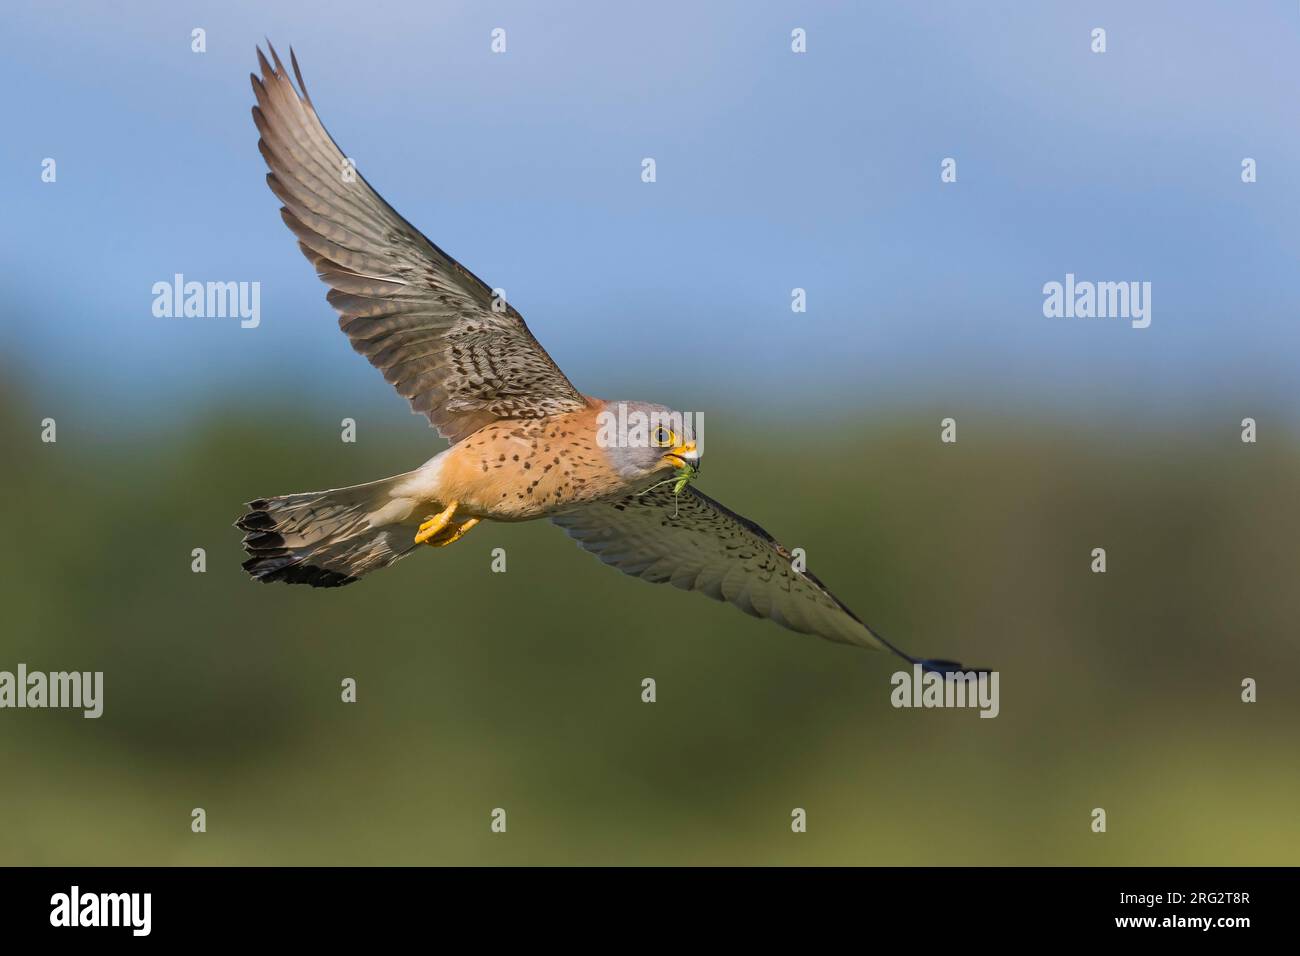 Lesser Kestrel (Falco naumannis) in Italy. Adult male in flight with a cricket as prey in its beak. Stock Photo